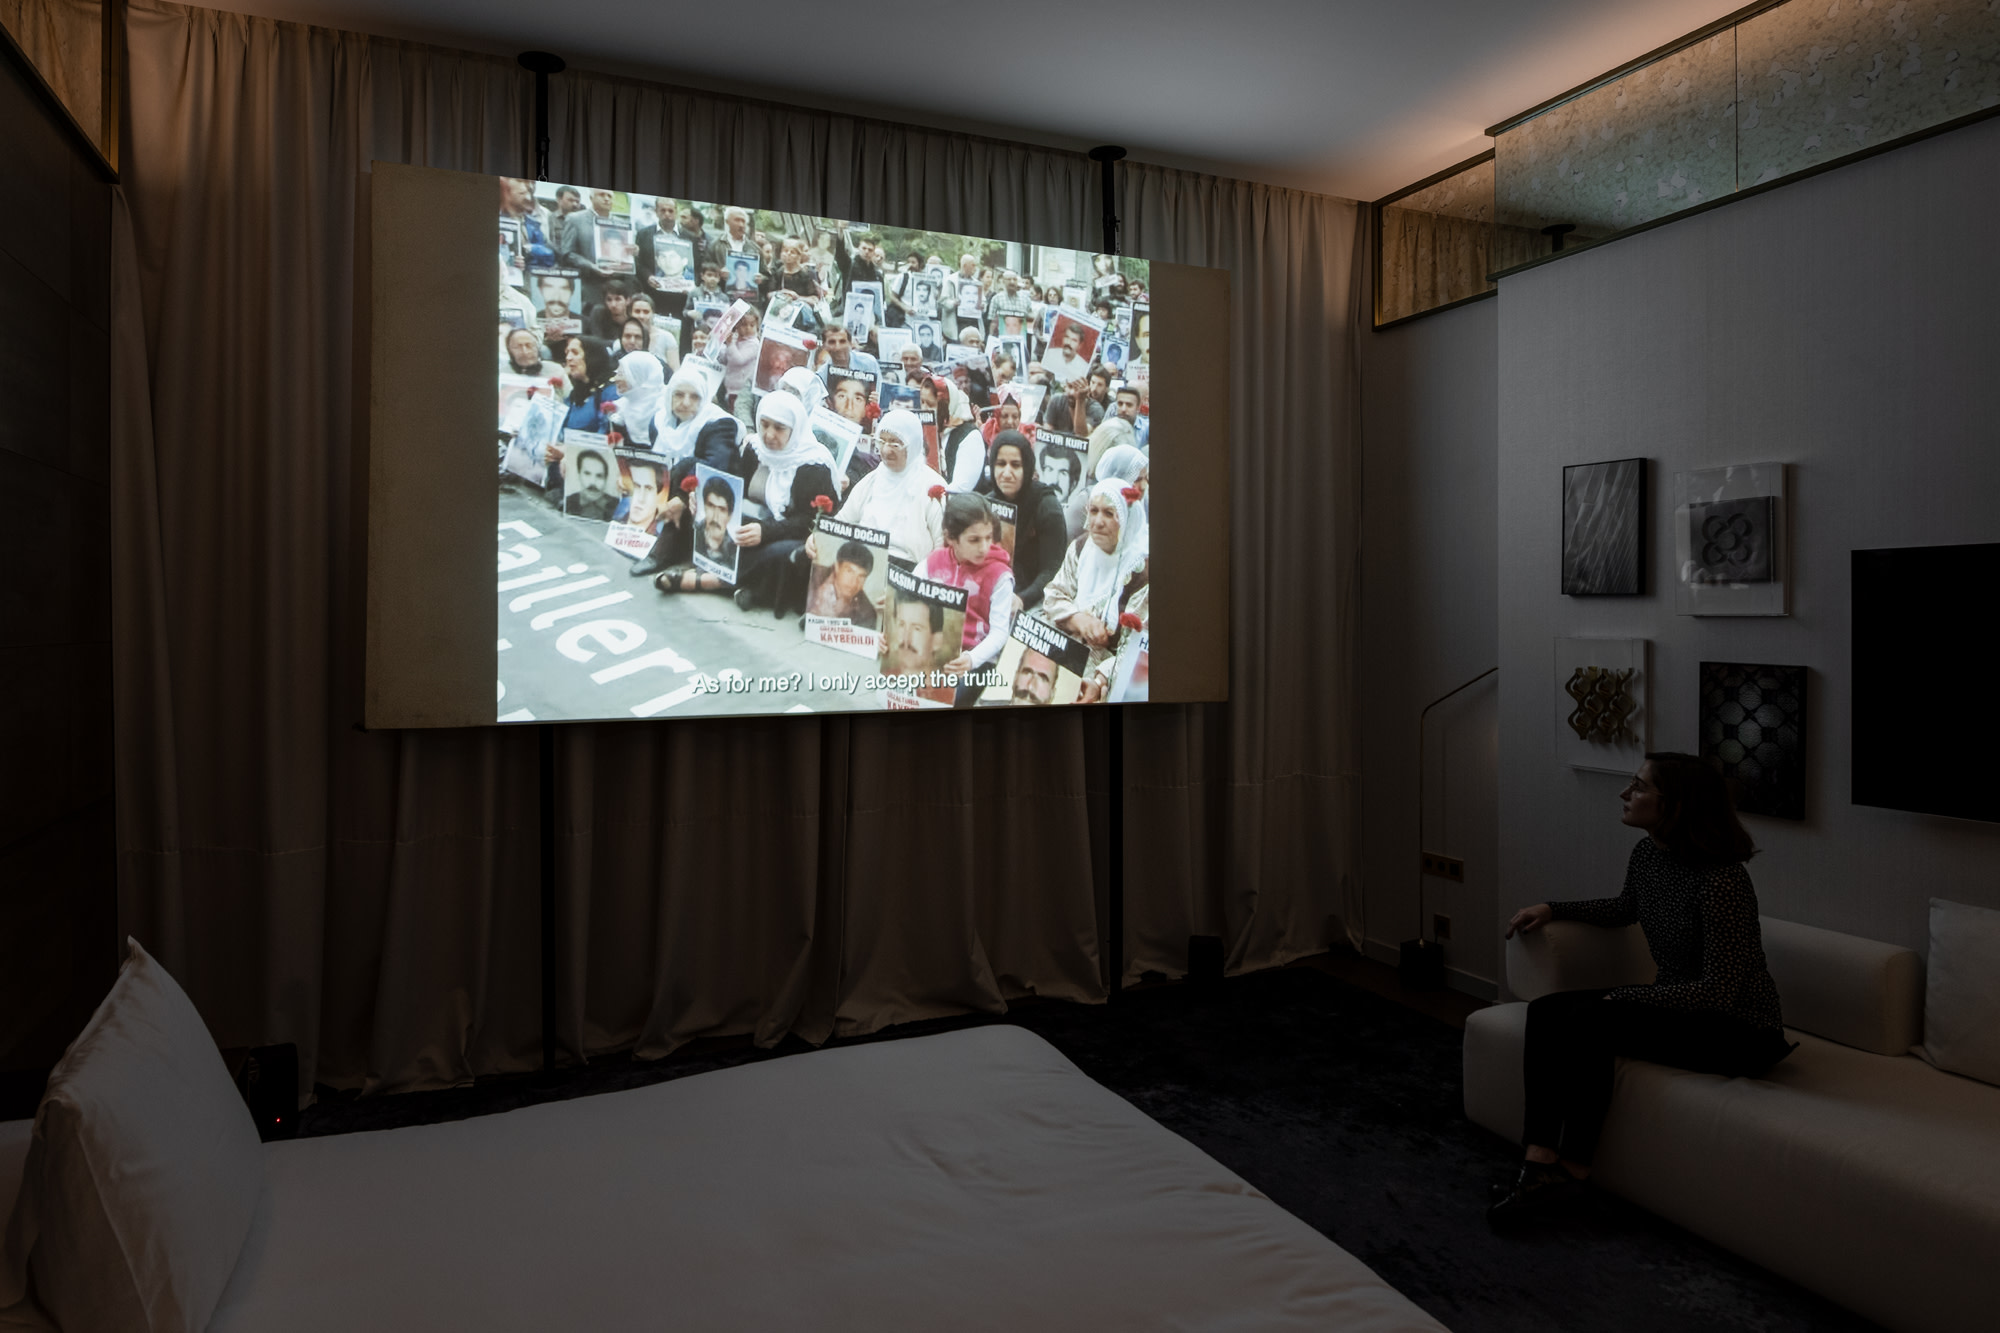 a video projected on a screen in a hotel room with a woman watching from a sofa